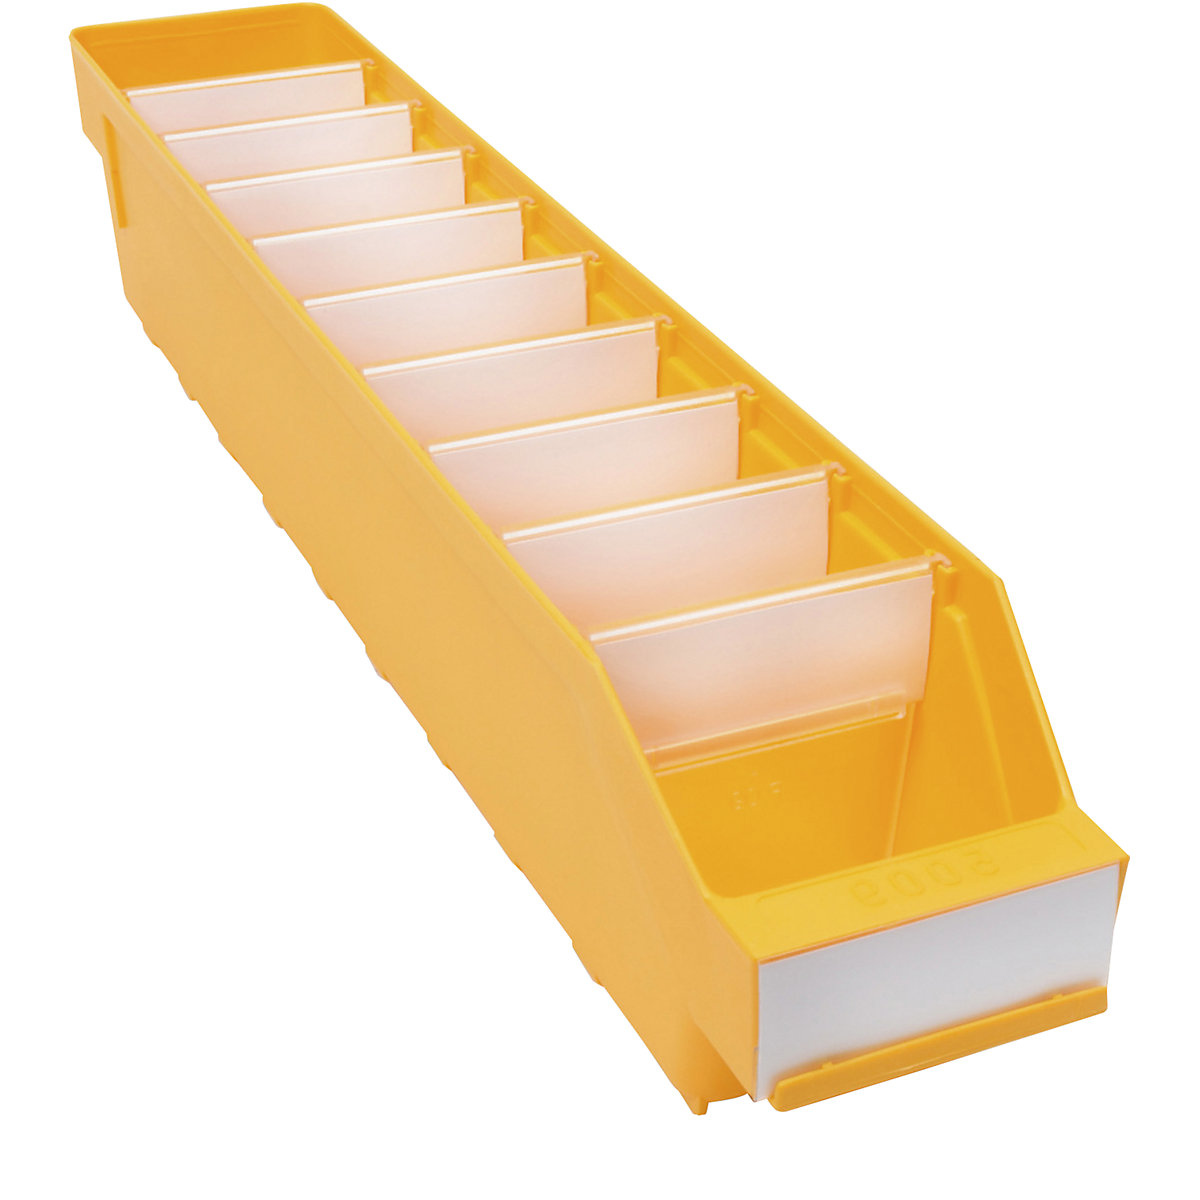 Shelf bin made of highly impact resistant polypropylene – STEMO, yellow, LxWxH 500 x 90 x 95 mm, pack of 40-21